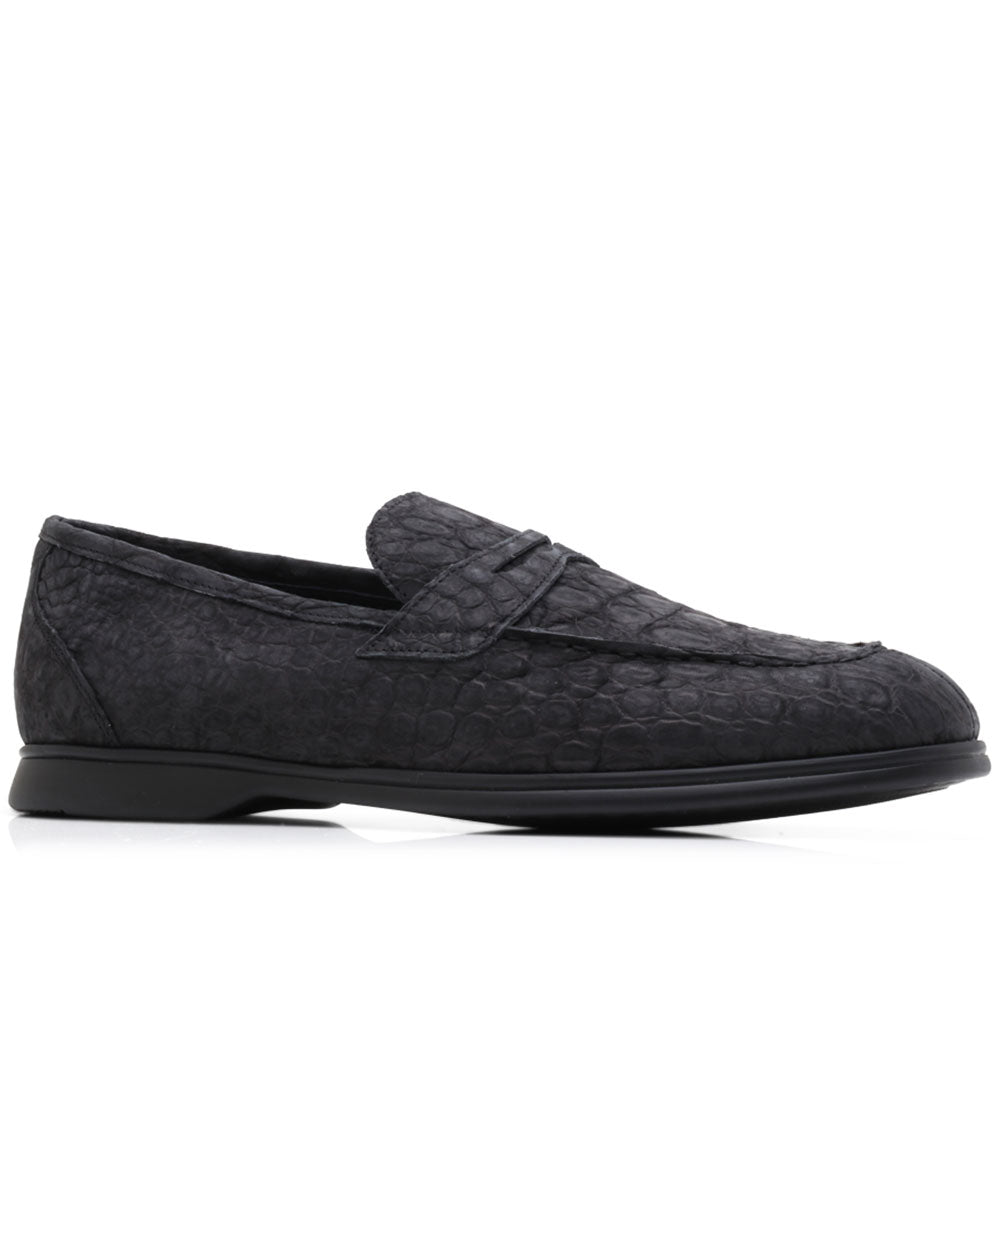 Suede Crocodile Casual Loafer in Black